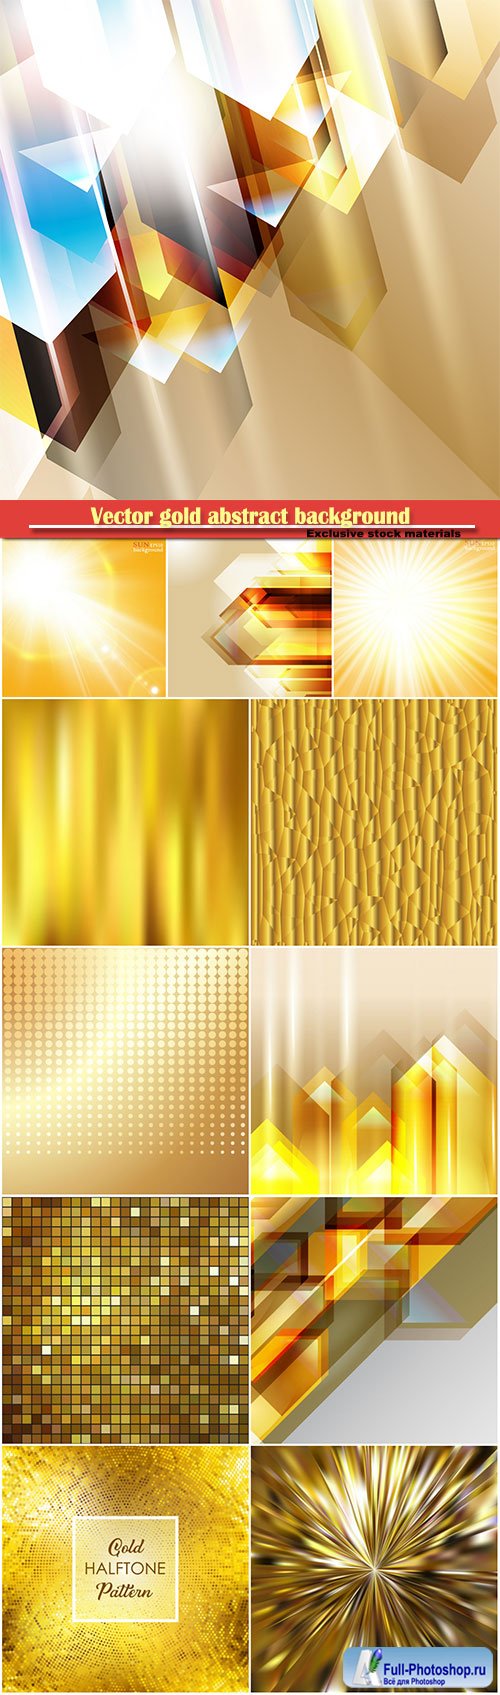 Vector gold abstract background with iridescent mesh gradient